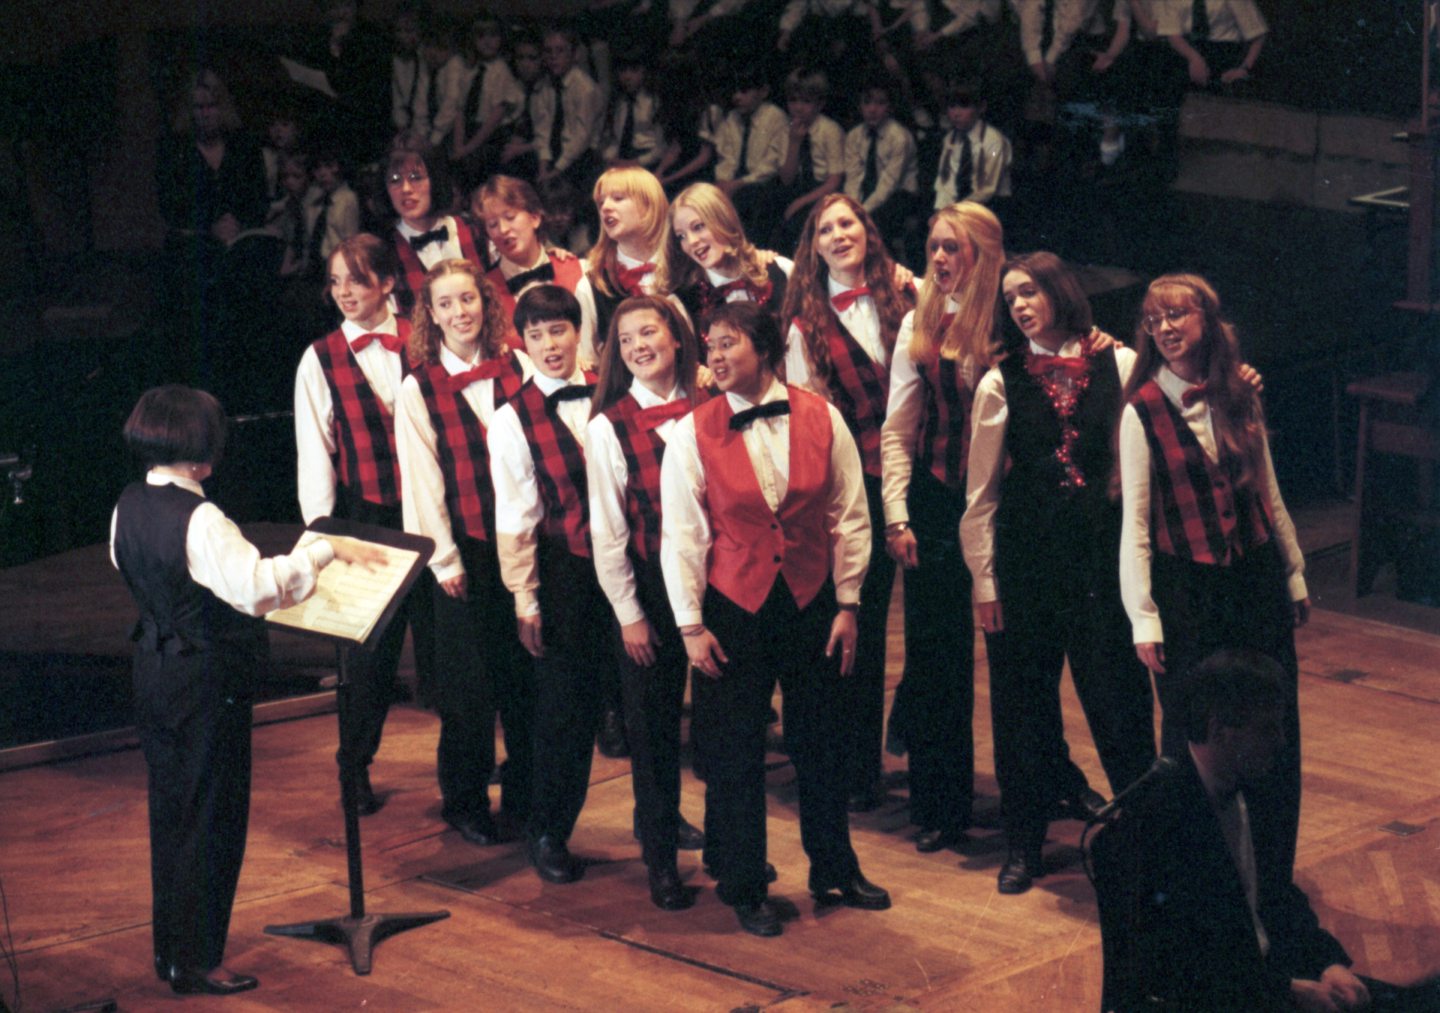 Conductor Joanne Burgess and Cults Academy Barber Shop Group on stage during the Evening Express Carol Concert at the Music Hall